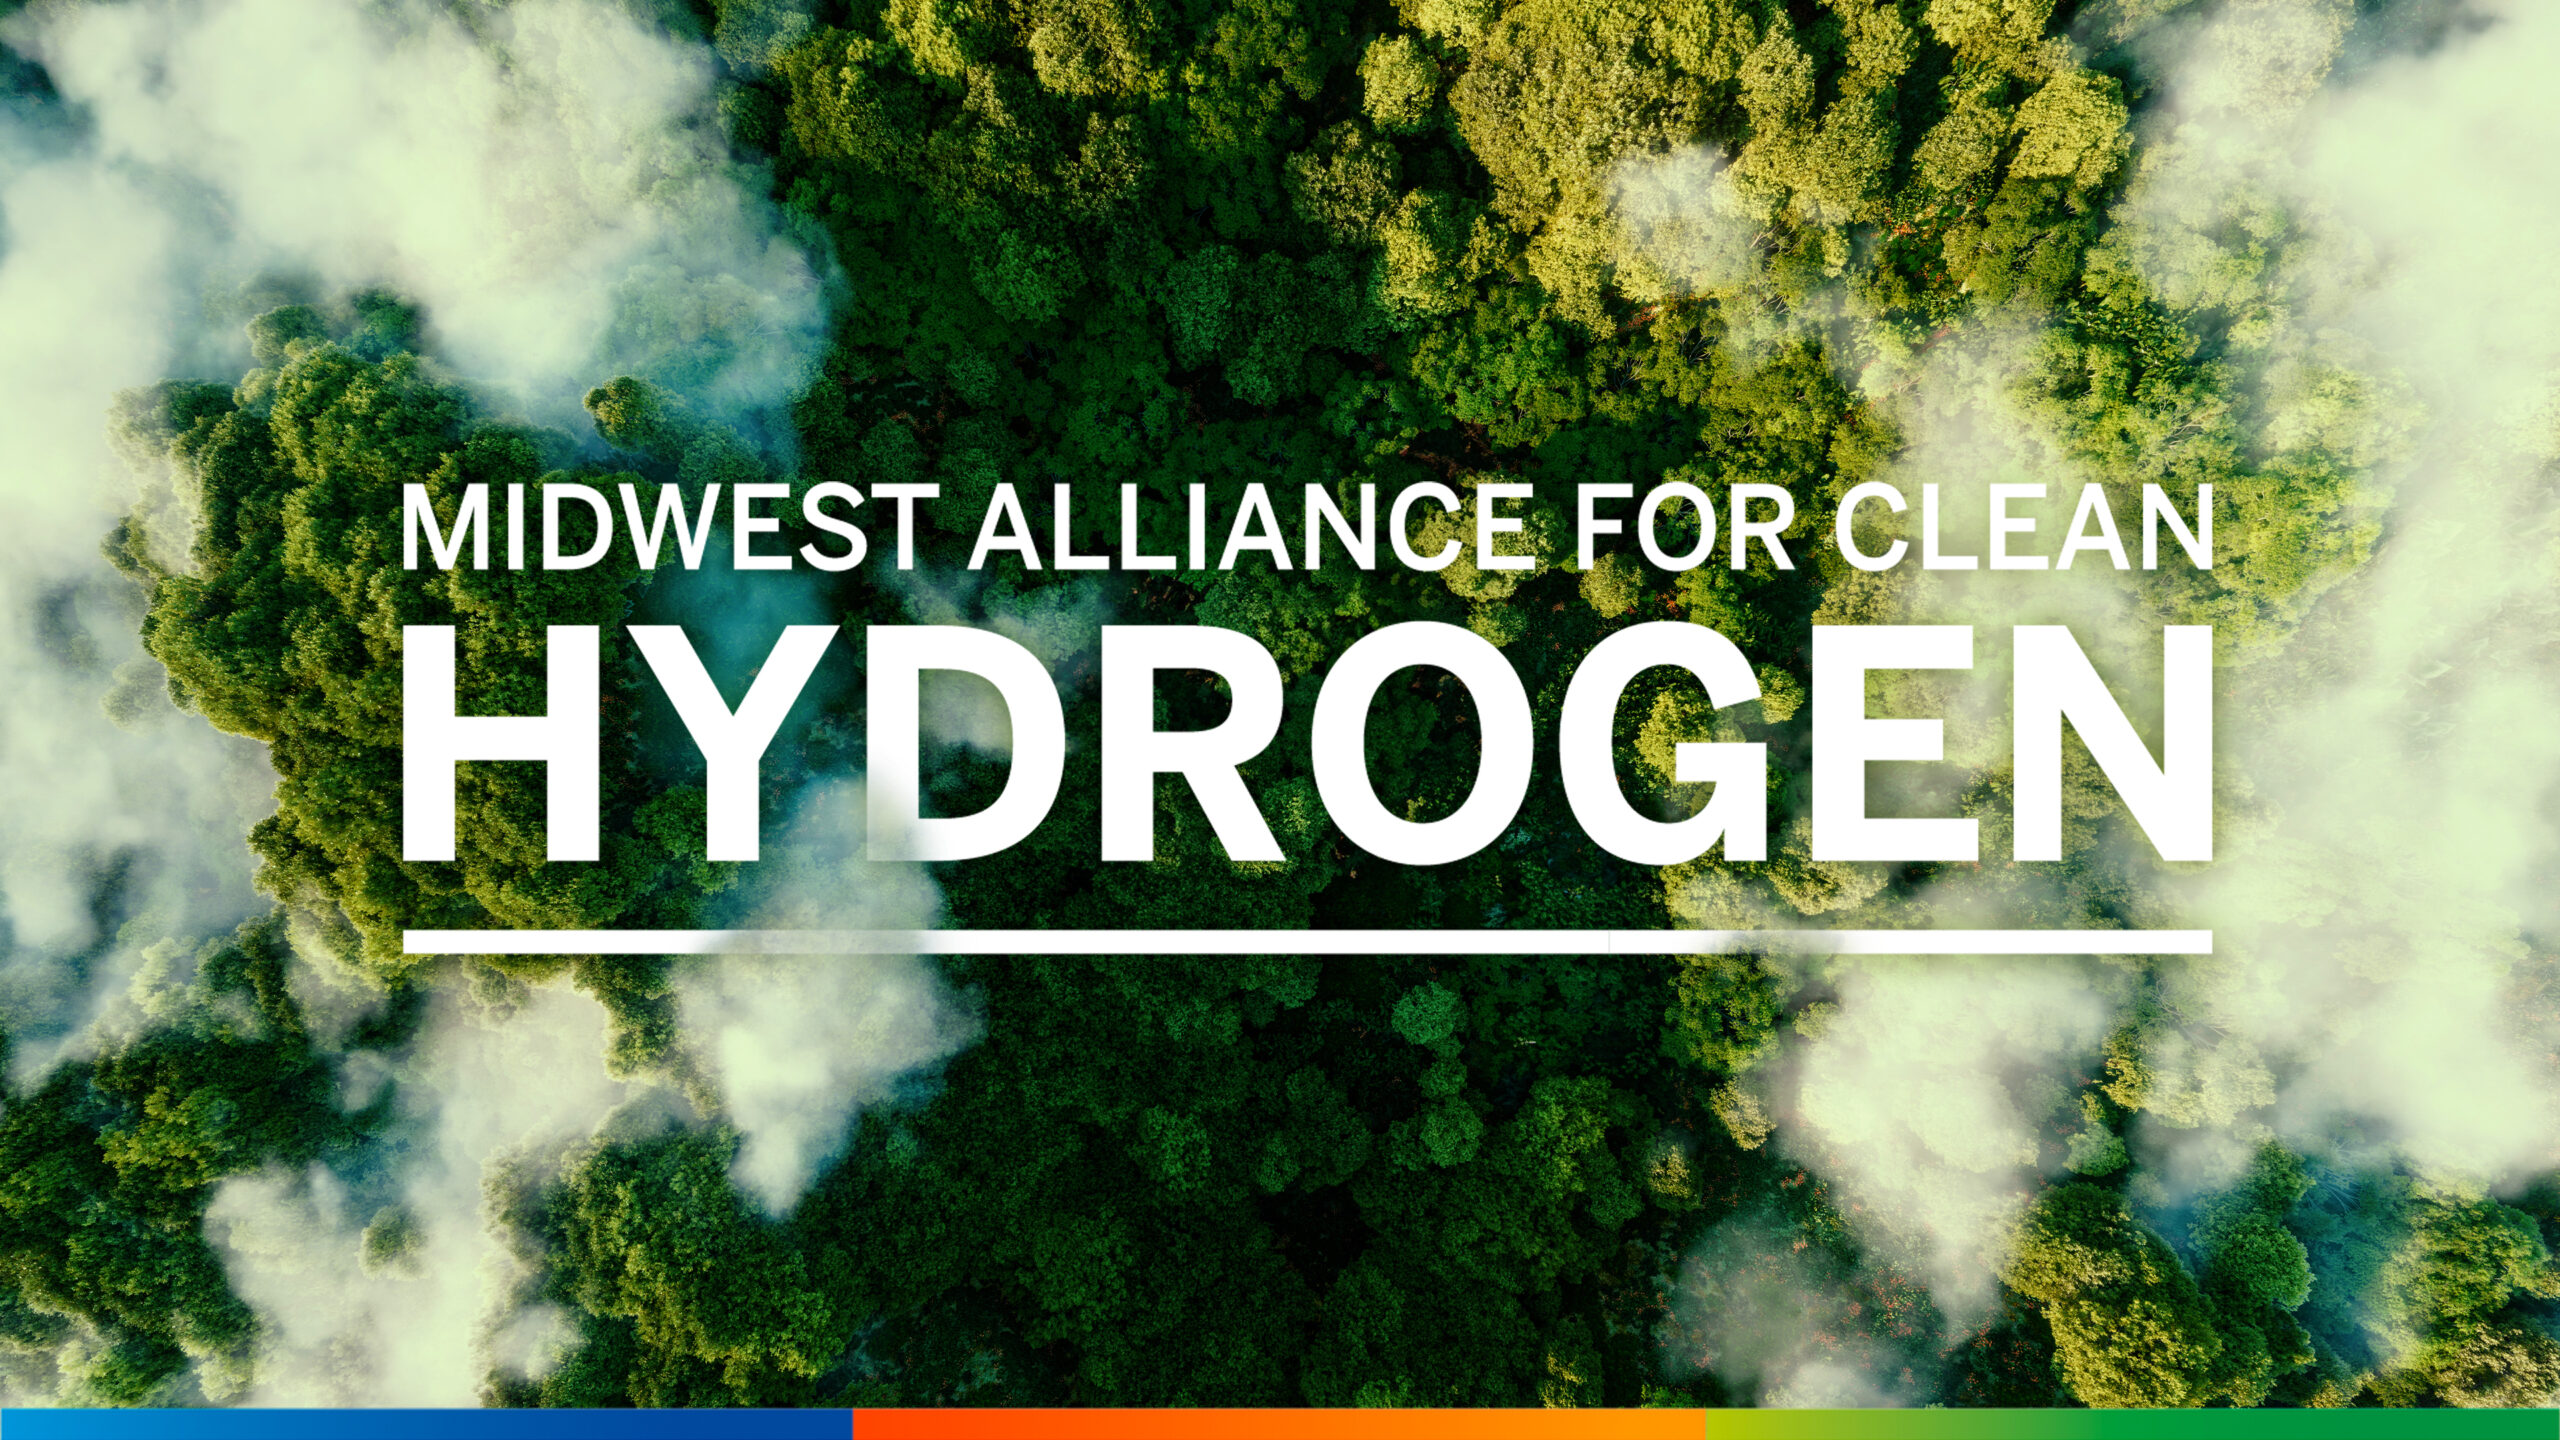 Midwest Alliance for Clean Hydrogen.